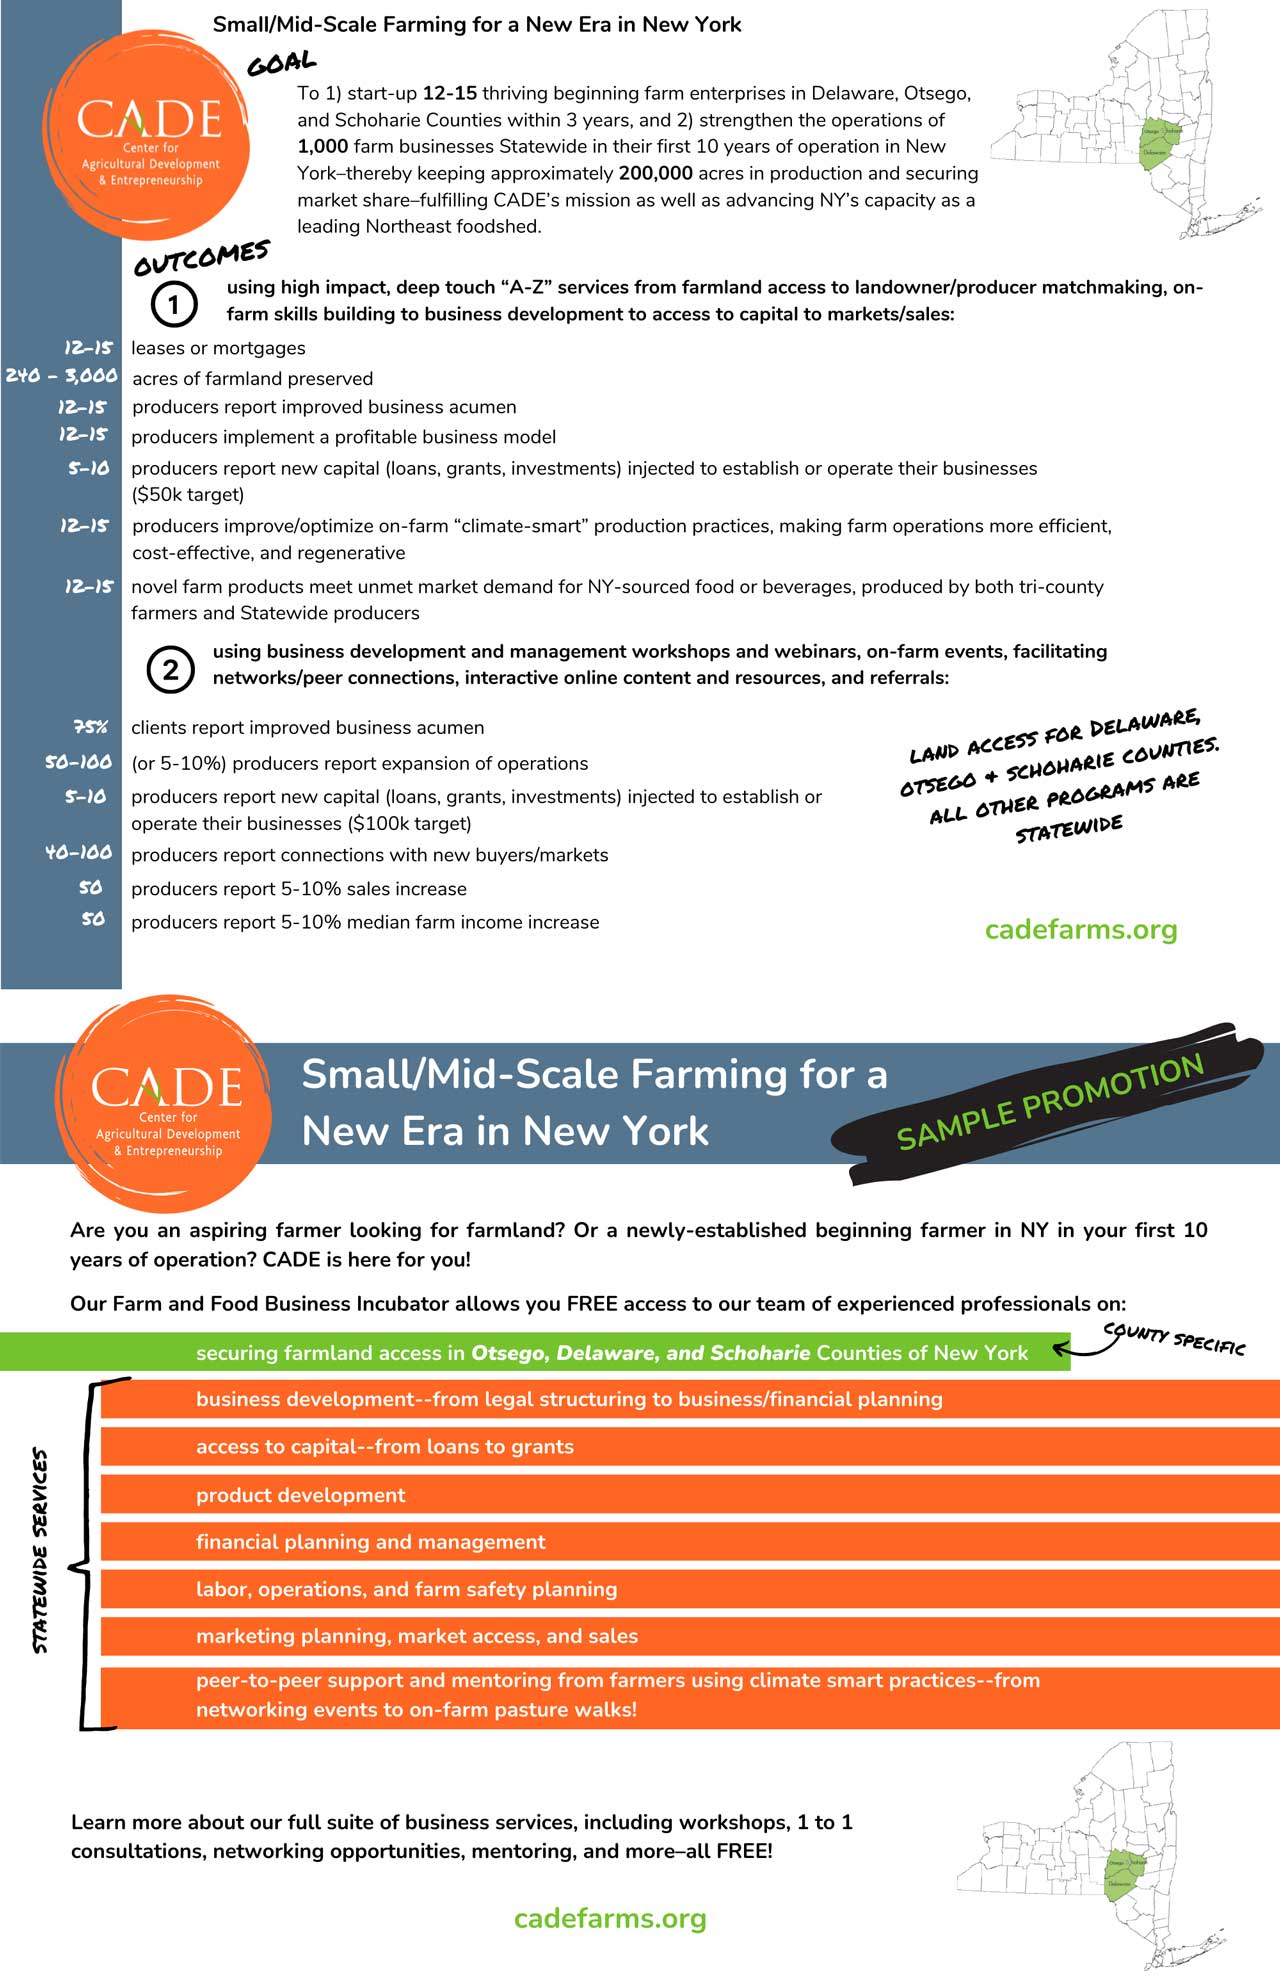 Small/Mid-Scale Farming for a New Era in New York poster